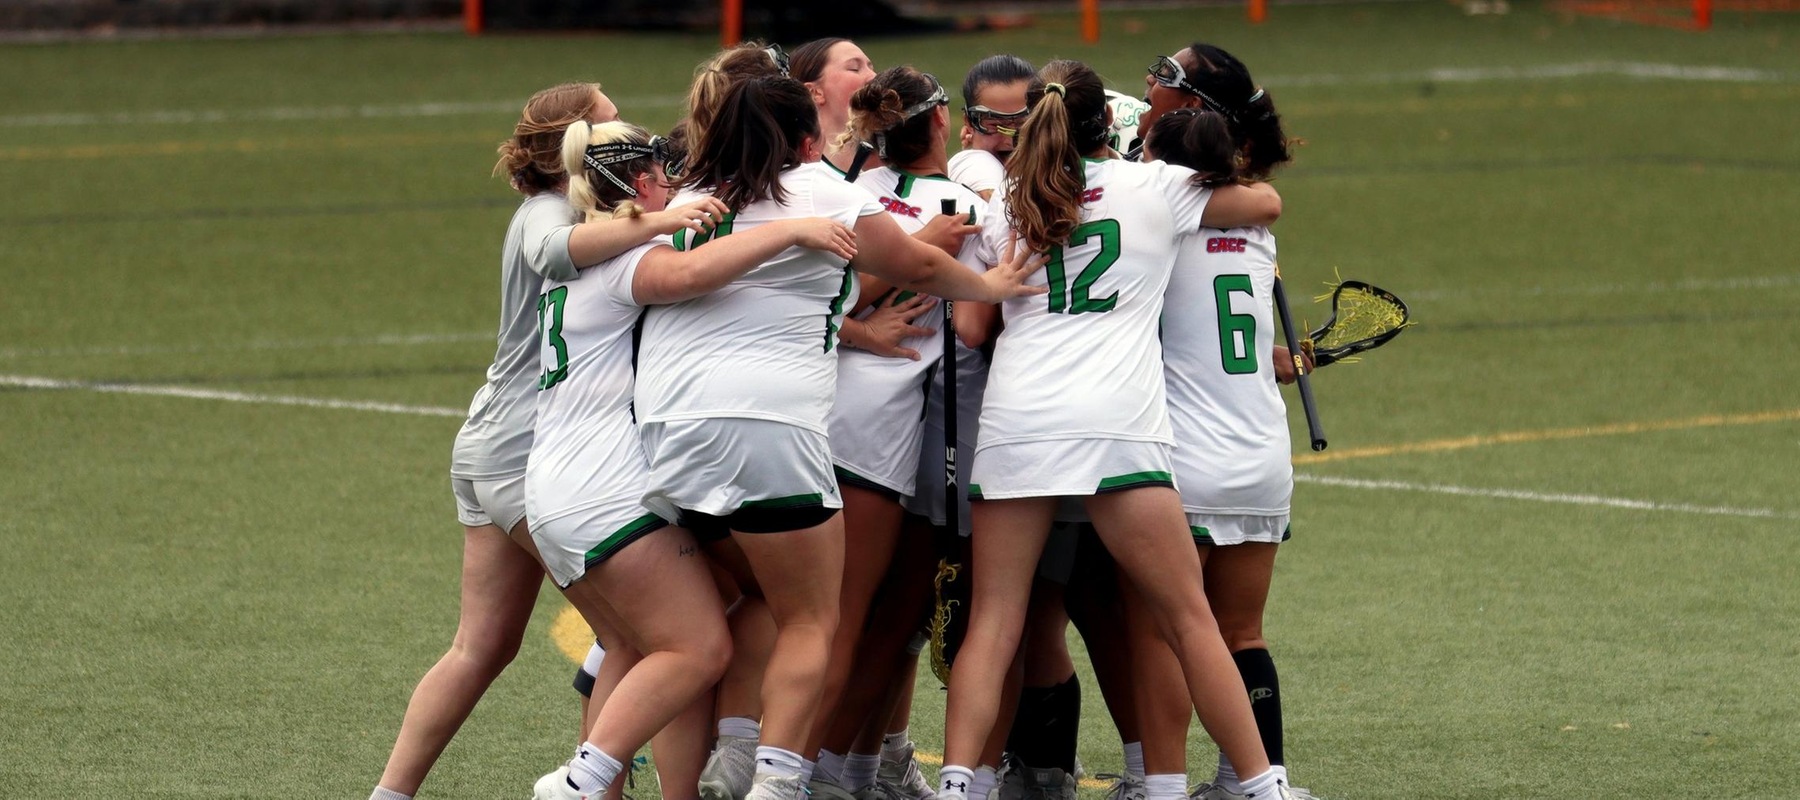 Women’s Lacrosse Makes Return Trip to CACC Semifinals With 18-11 Win Over Bridgeport